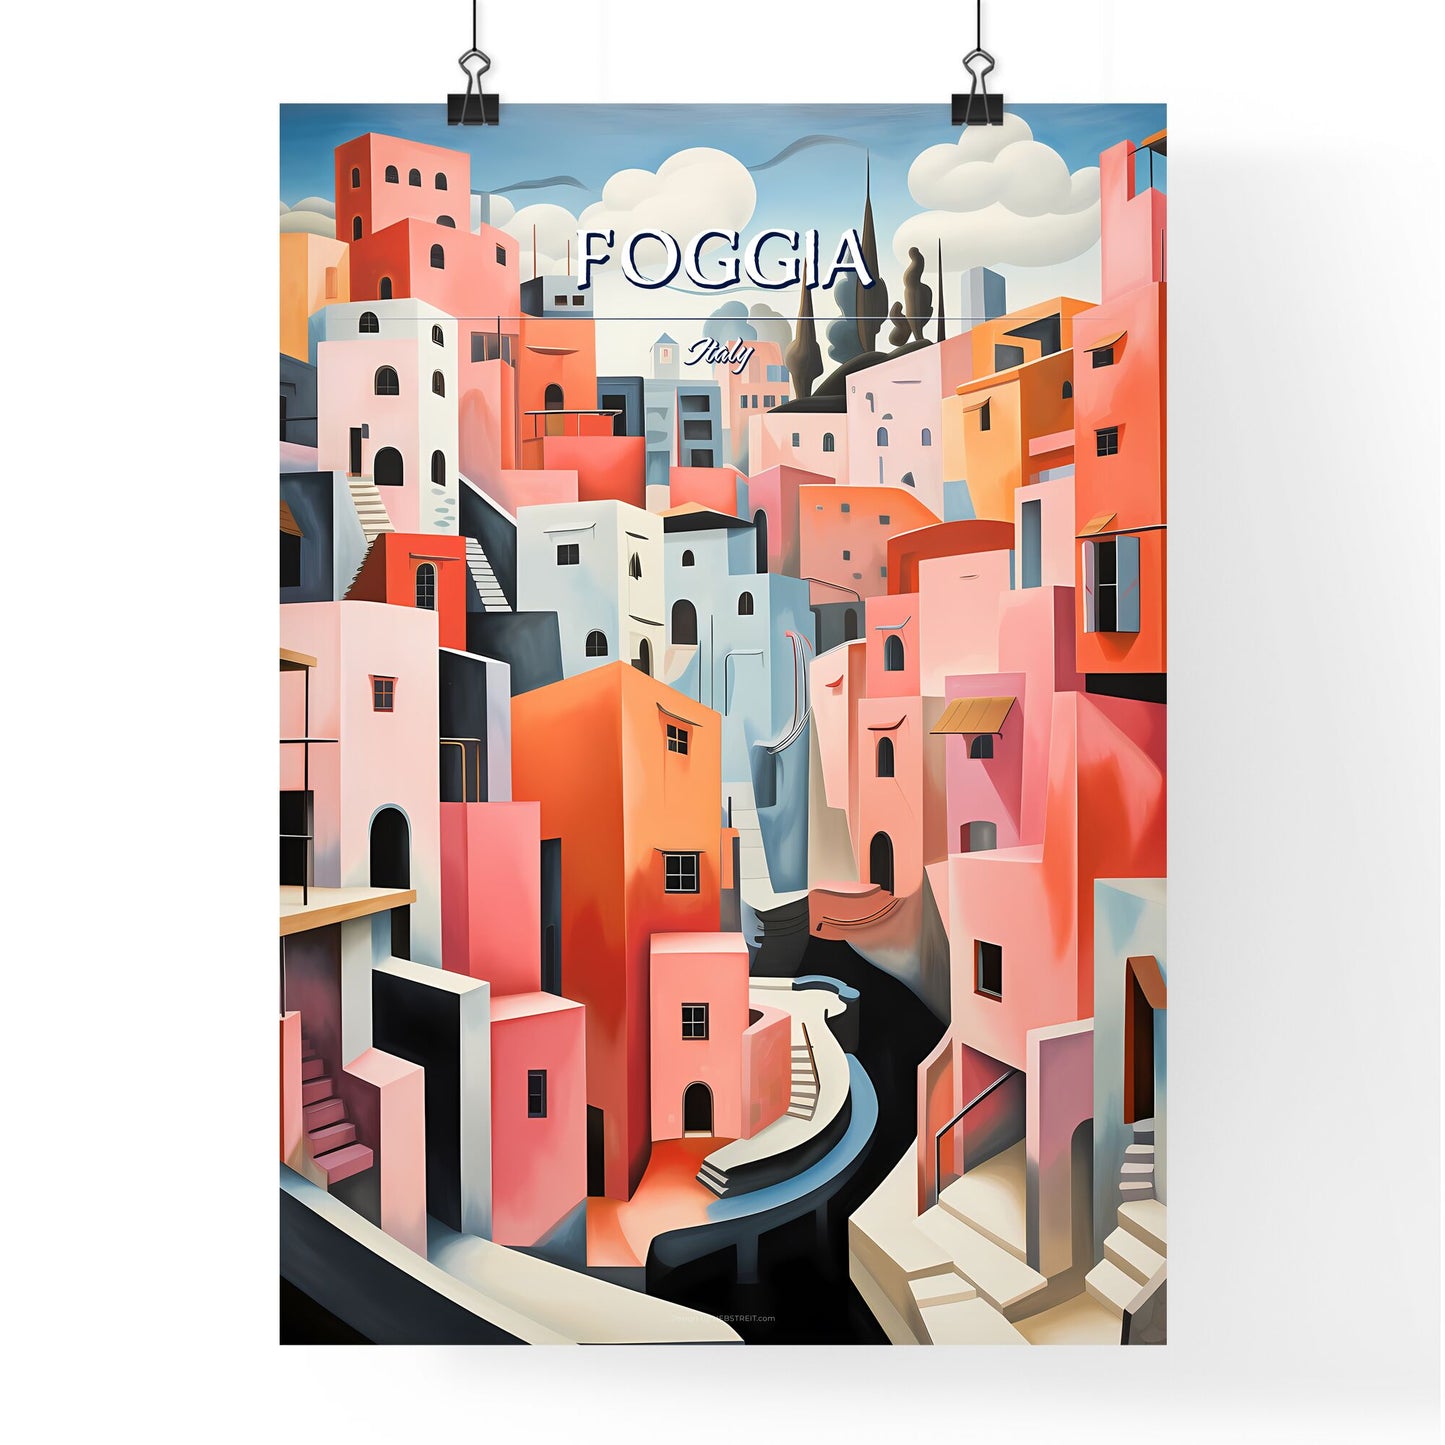 Foggia, Italy - Art print of a painting of a colorful city Default Title